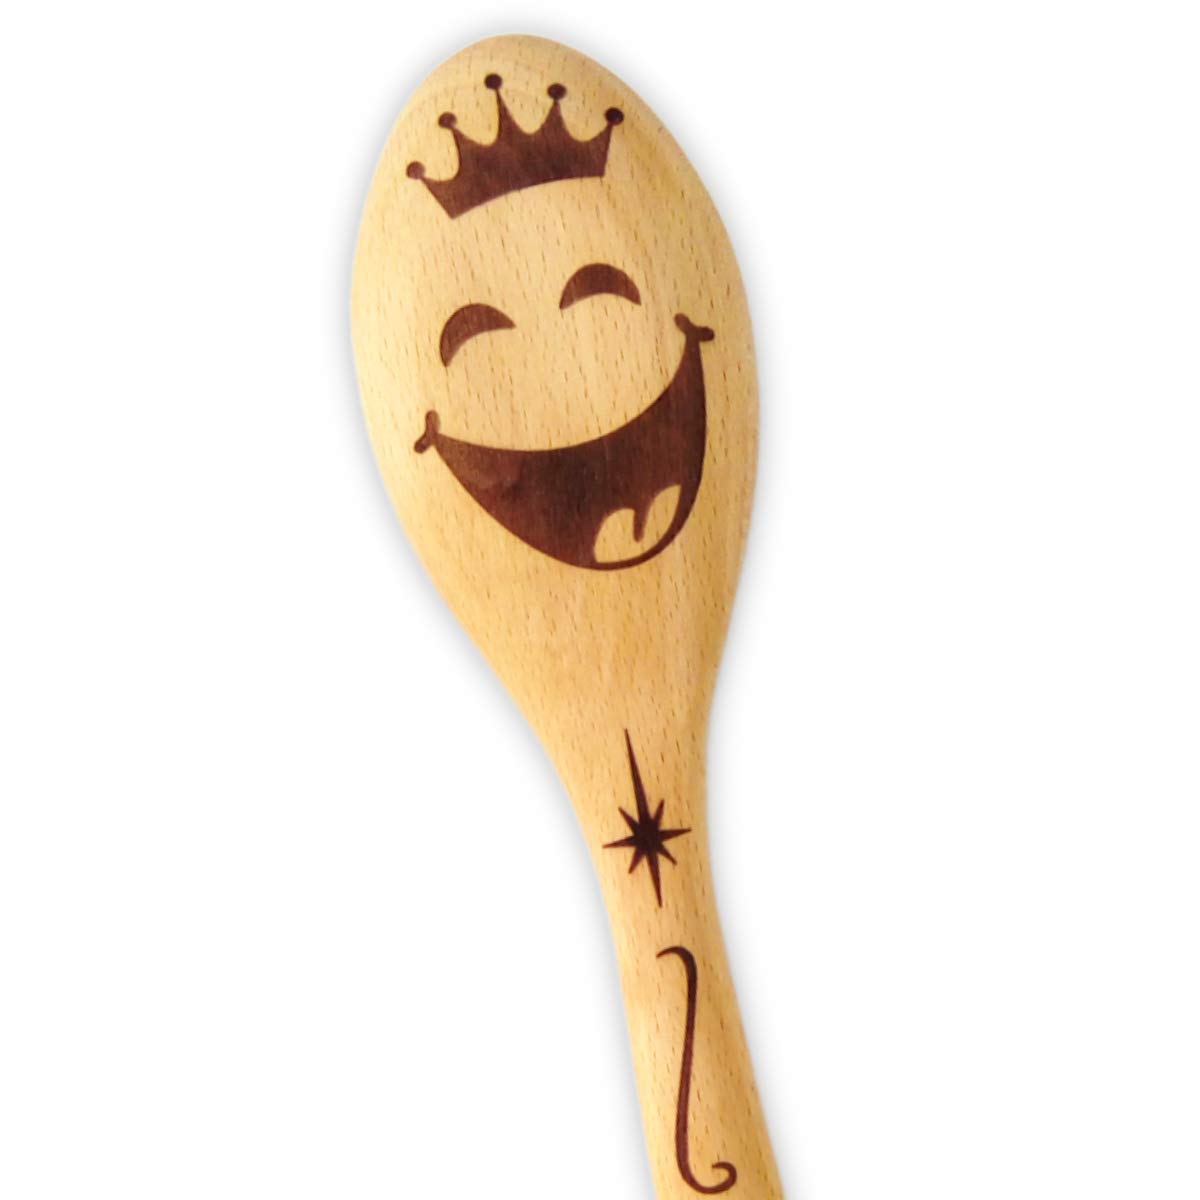 Engraved Wooden Spoon with Hole, Cute Smiley Face